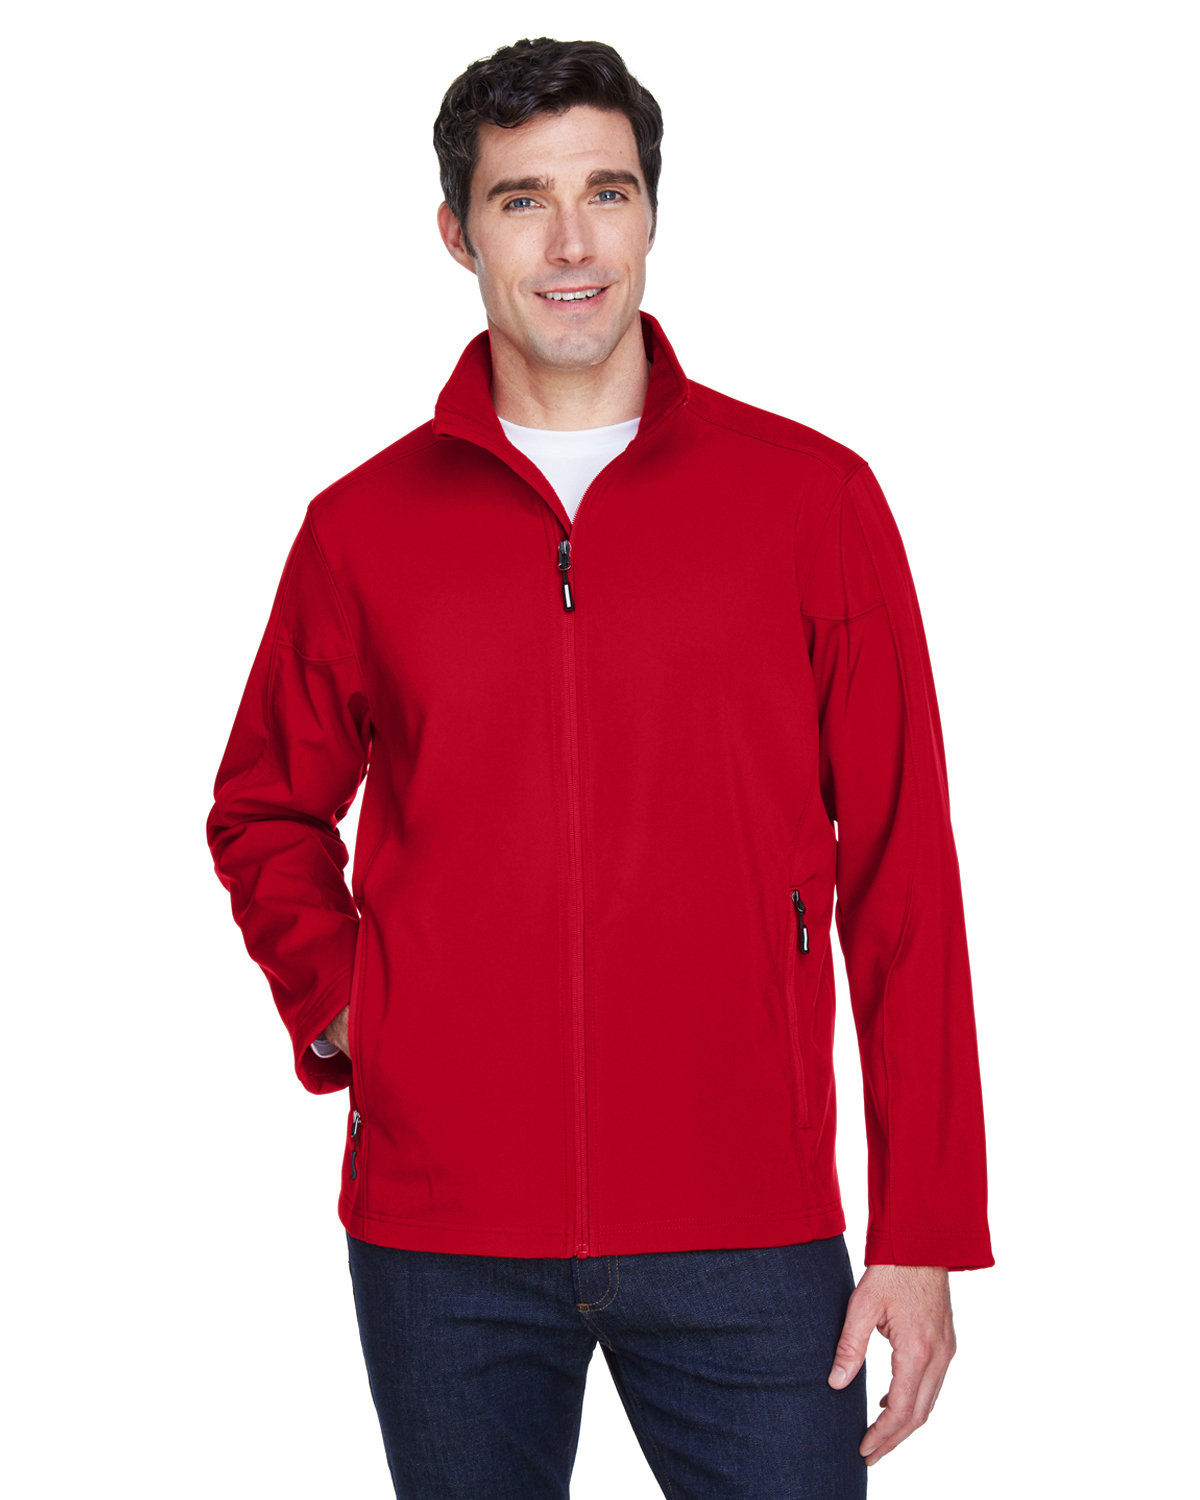 Core365 Men's Cruise Two-Layer Fleece Bonded Soft Shell Jacket CLASSIC RED 